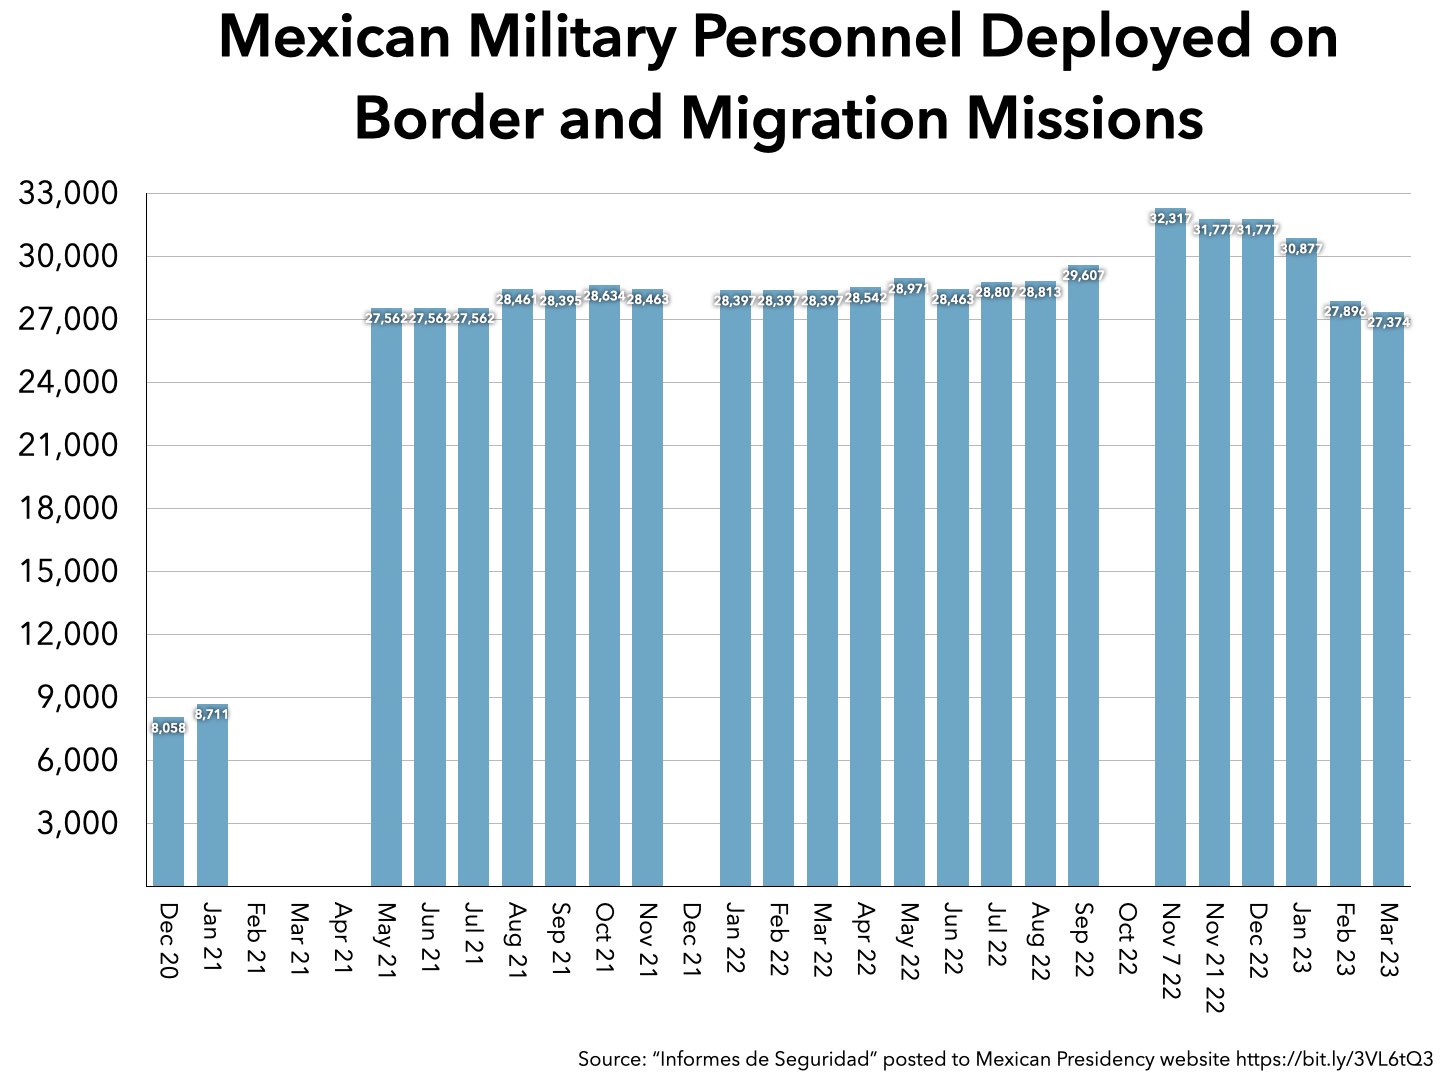 Chart: Mexican Military Personnel Deployed on Border and Migration Missions

	Dec 20	Jan 21	Feb 21	Mar 21	Apr 21	May 21	Jun 21	Jul 21	Aug 21	Sep 21	Oct 21	Nov 21	Dec 21	Jan 22	Feb 22	Mar 22	Apr 22	May 22	Jun 22	Jul 22	Aug 22	Sep 22	Oct 22	Nov 7 22	Nov 21 22	Dec 22	Jan 23	Feb 23	Mar 23
Military Personnel	8058	8711				27562	27562	27562	28461	28395	28634	28463		28397	28397	28397	28542	28971	28463	28807	28813	29607		32317	31777	31777	30877	27896	27374

Source: “Informes de Seguridad” posted to Mexican Presidency website https://bit.ly/3VL6tQ3